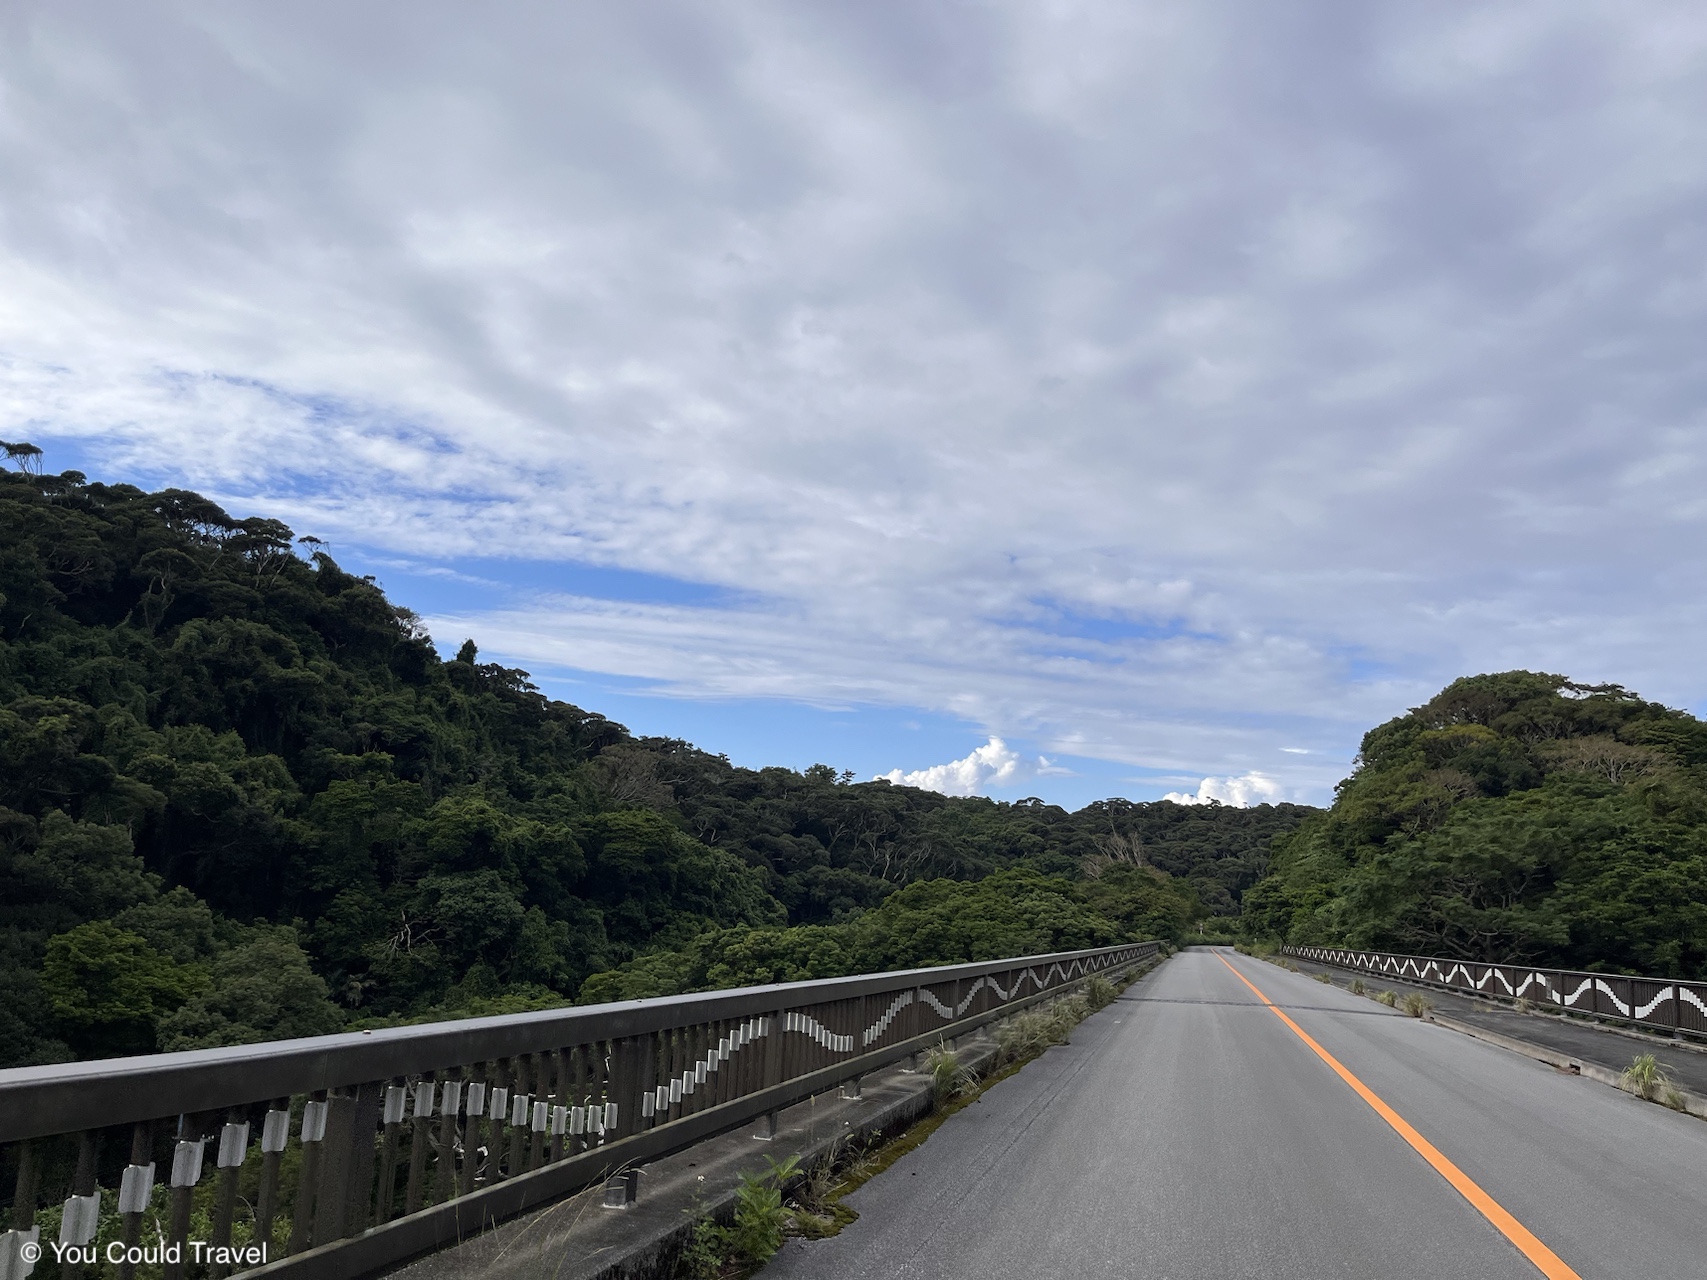 Driving in Okinawa surrounded by jungle